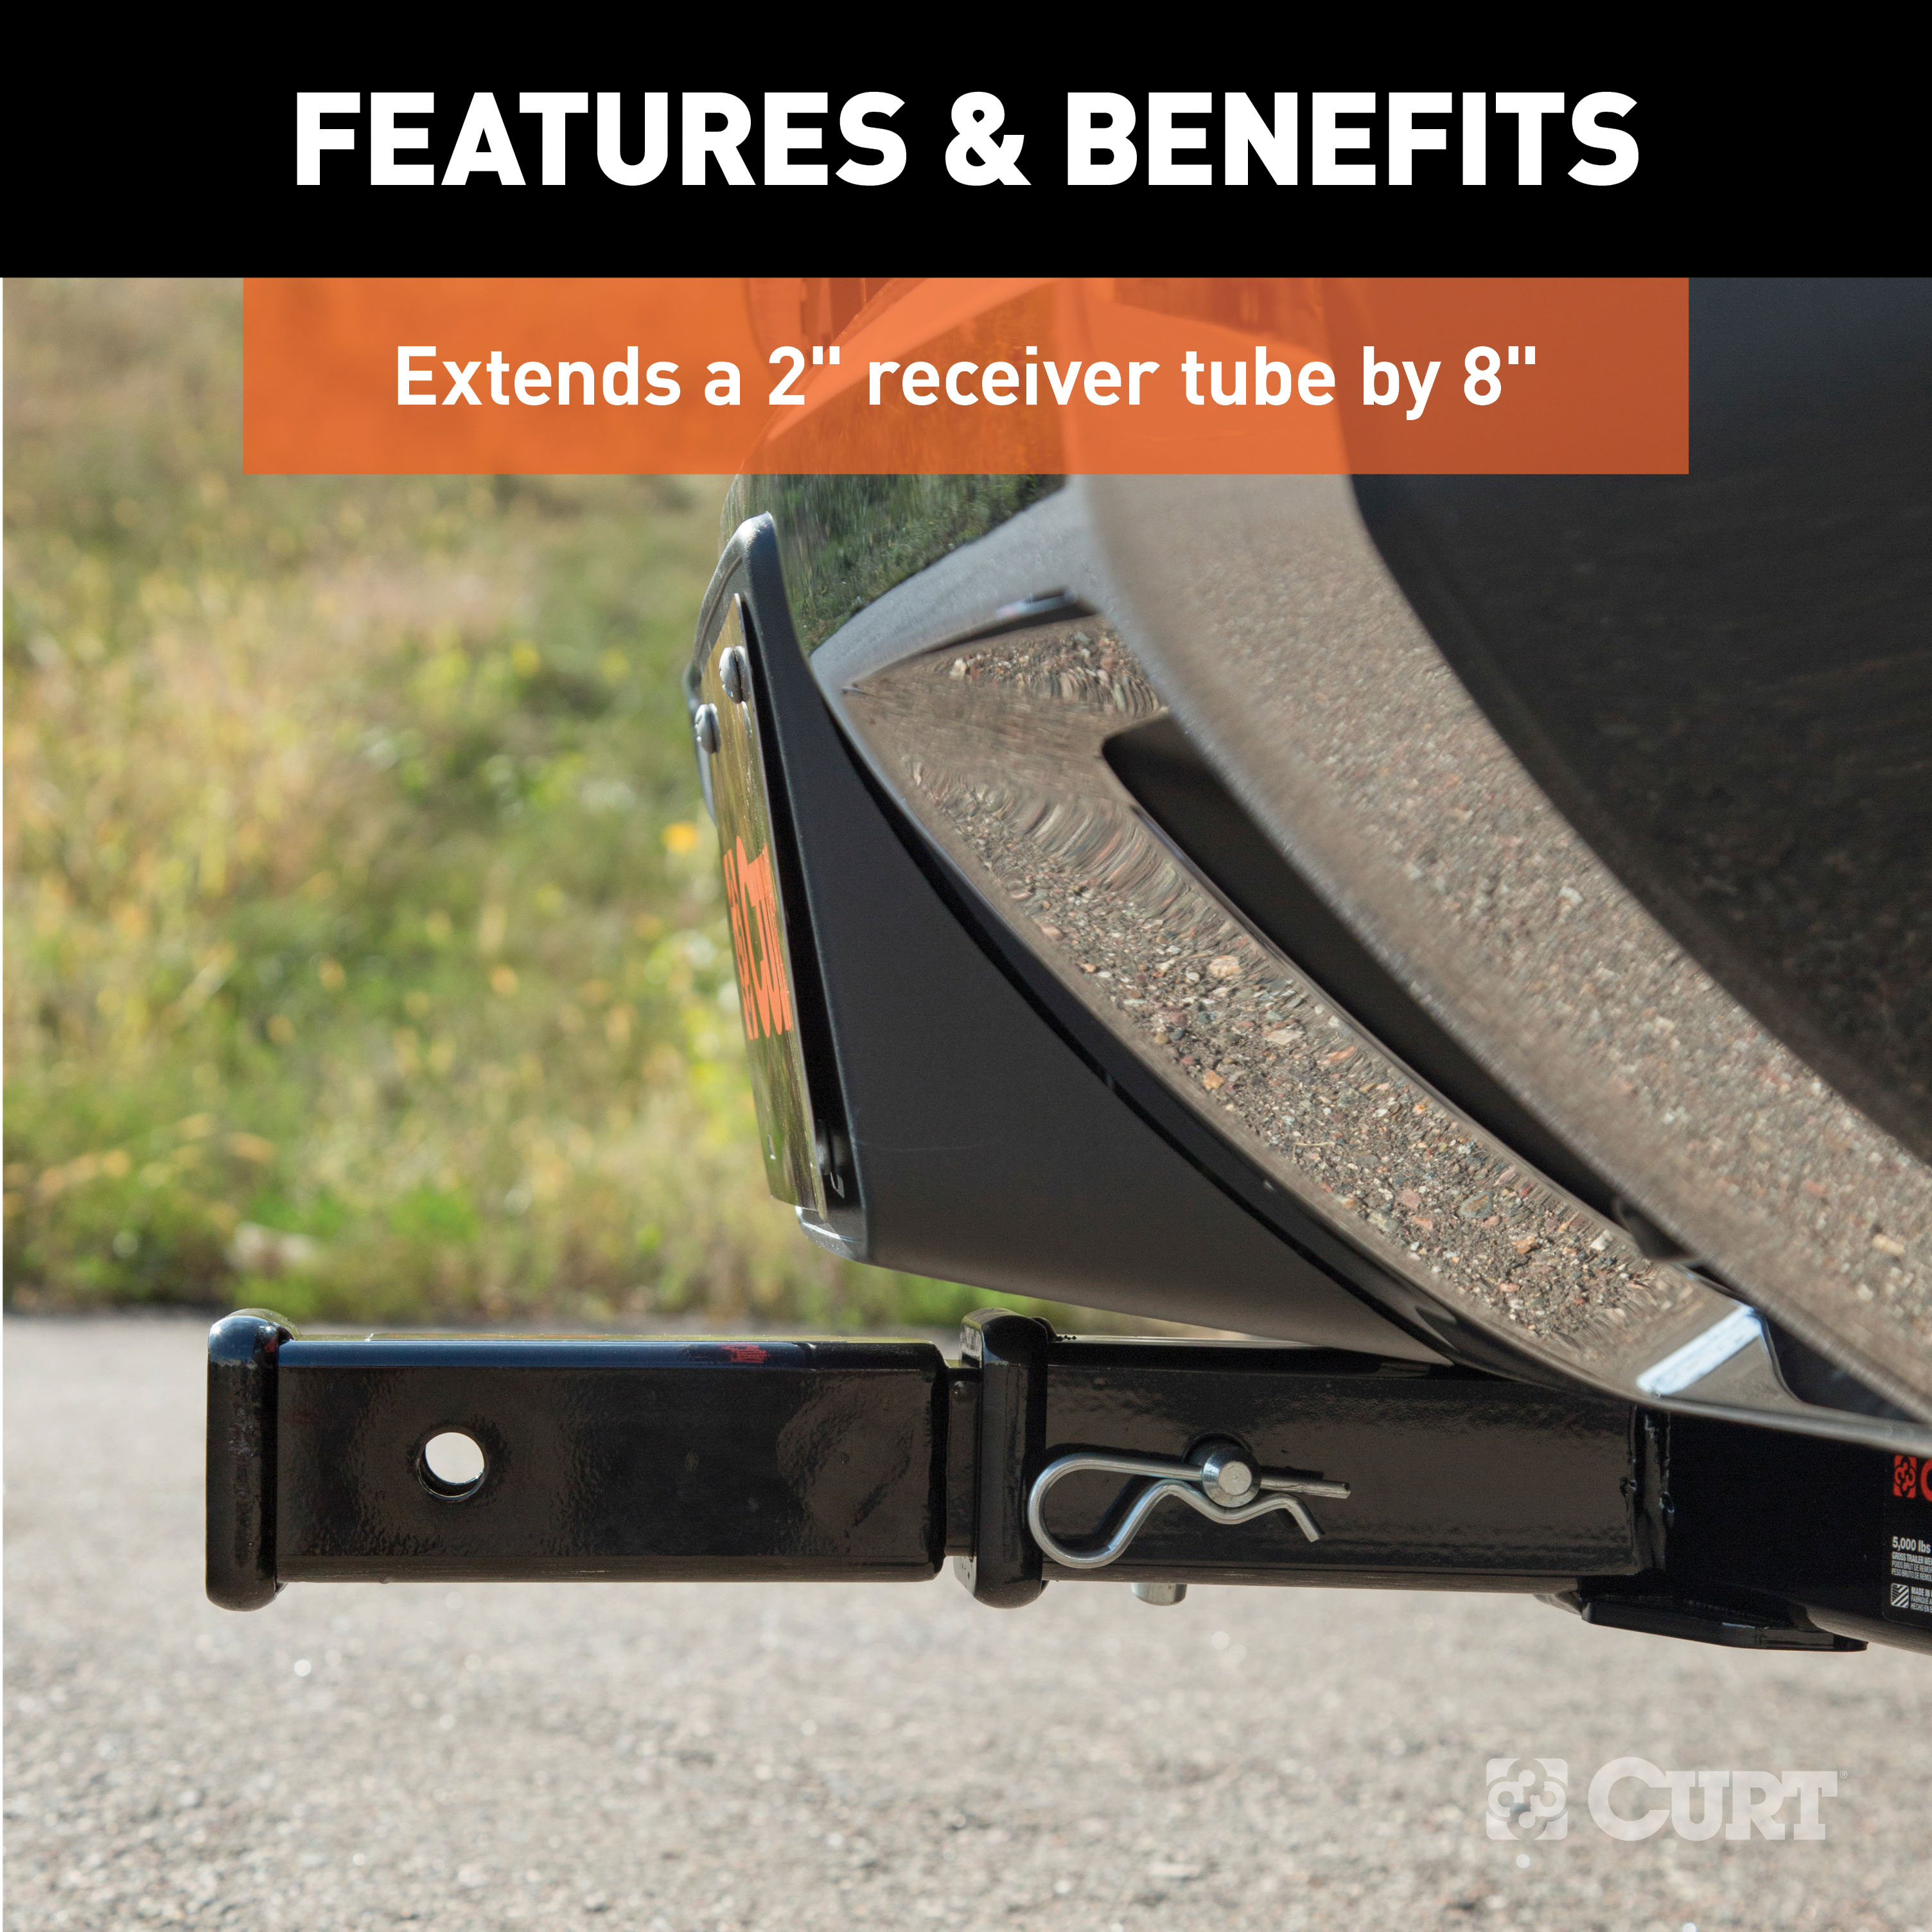 Curt 45791 8 Inch 3500 Pound Trailer Hitch Receiver Tube Extension with 2" Shank - image 3 of 4